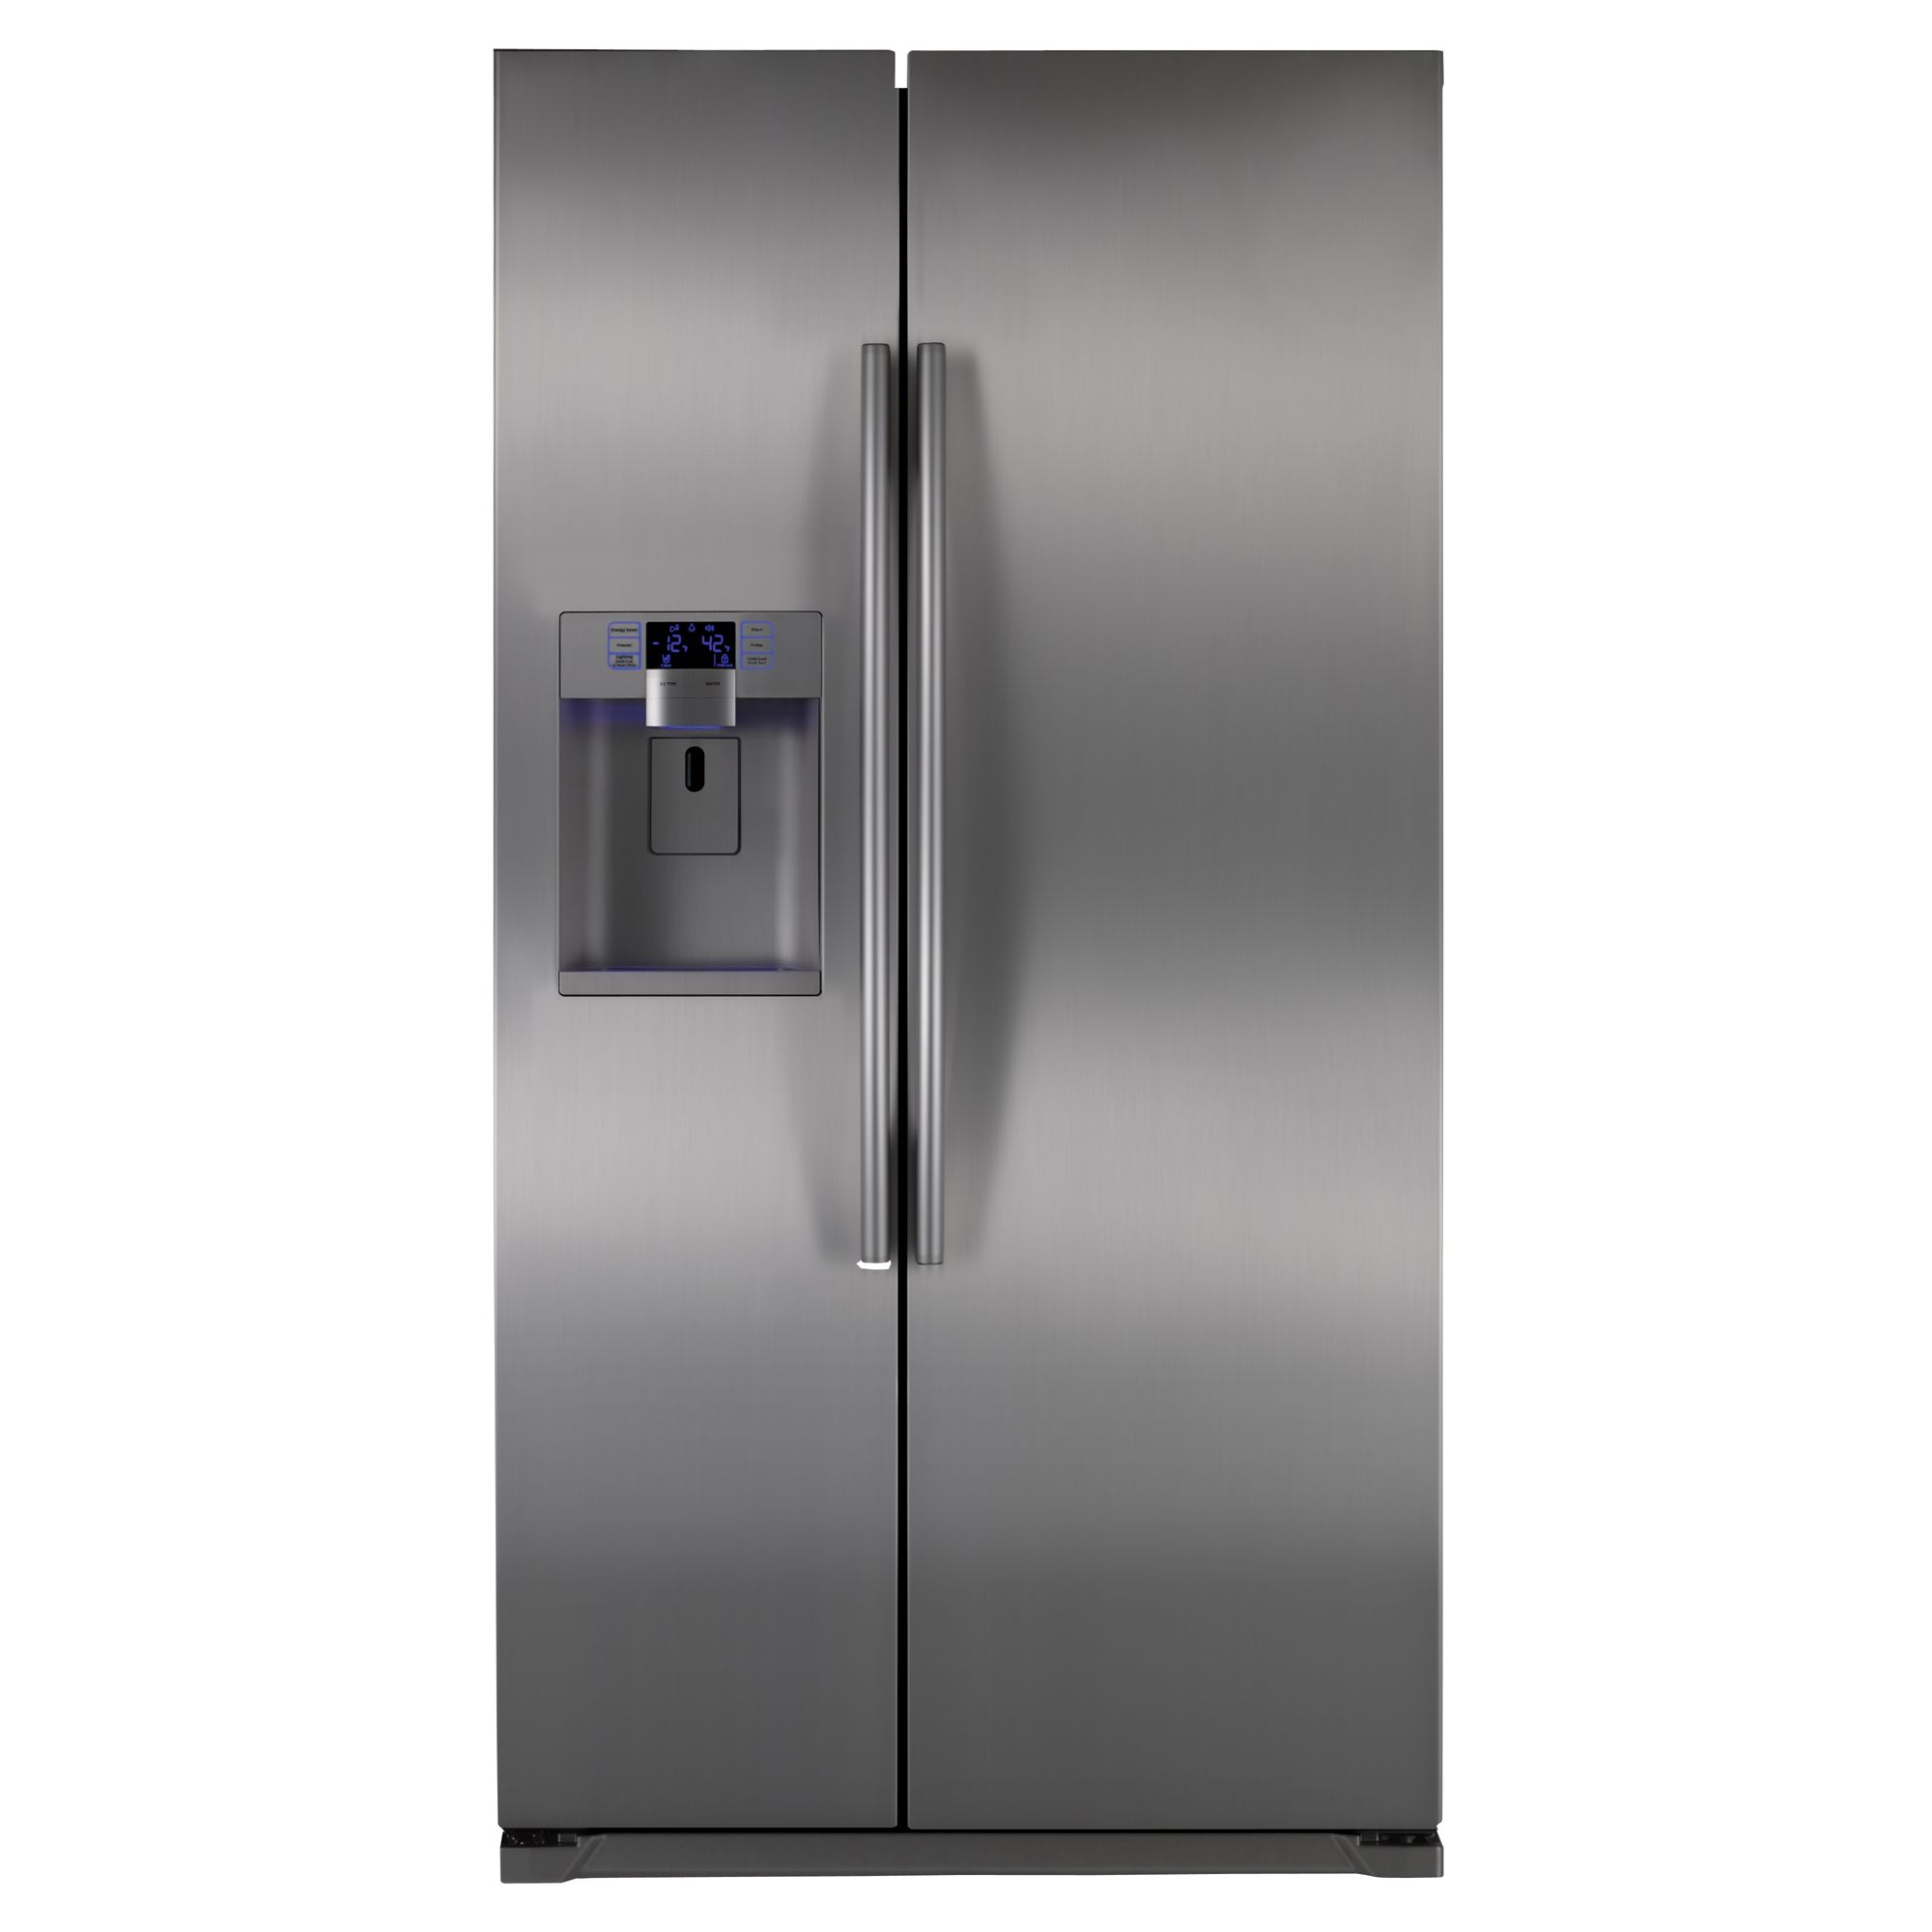 Samsung 24.1 cu. ft. Side-By-Side Refrigerator -Stainless Steel